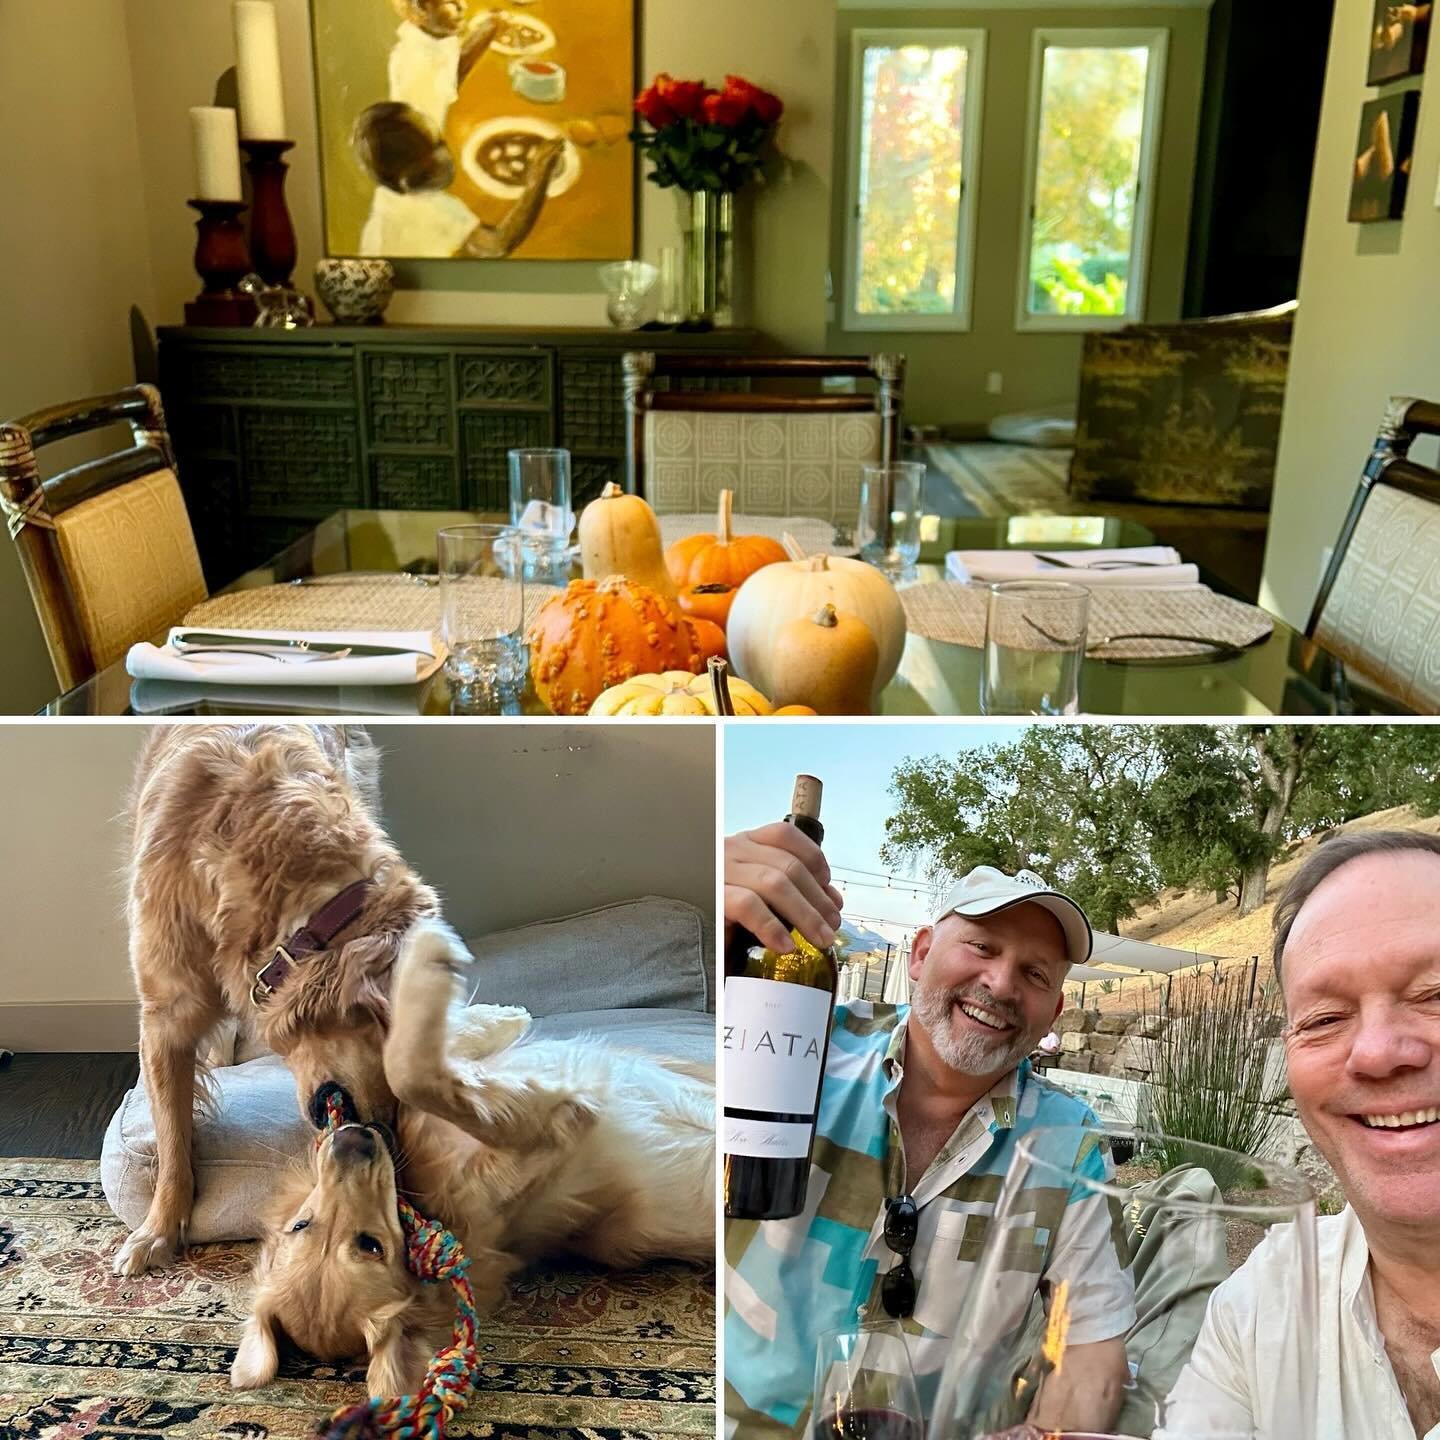 Happy Thanksgiving from our house and family to you and yours. May your table be full of love, food and wine!  We are so thankful and count our blessings!  #happythanksgivng #embracewhatisgood #thankful #goldenretriever #gooblegooble